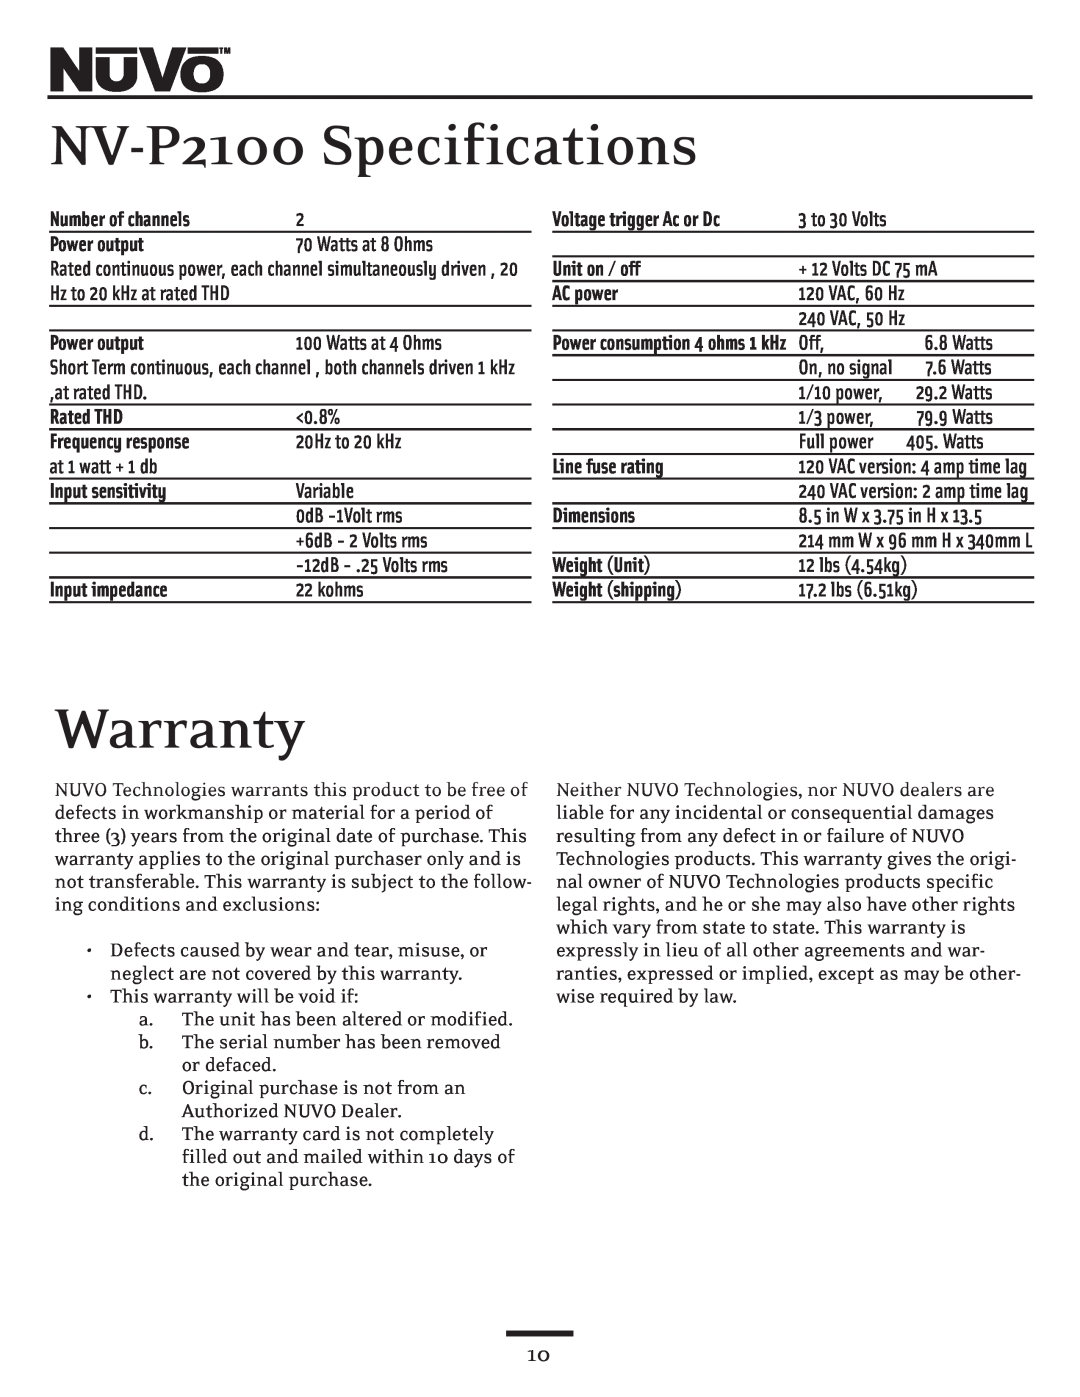 Nuvo owner manual NV-P2100Specifications, Warranty 